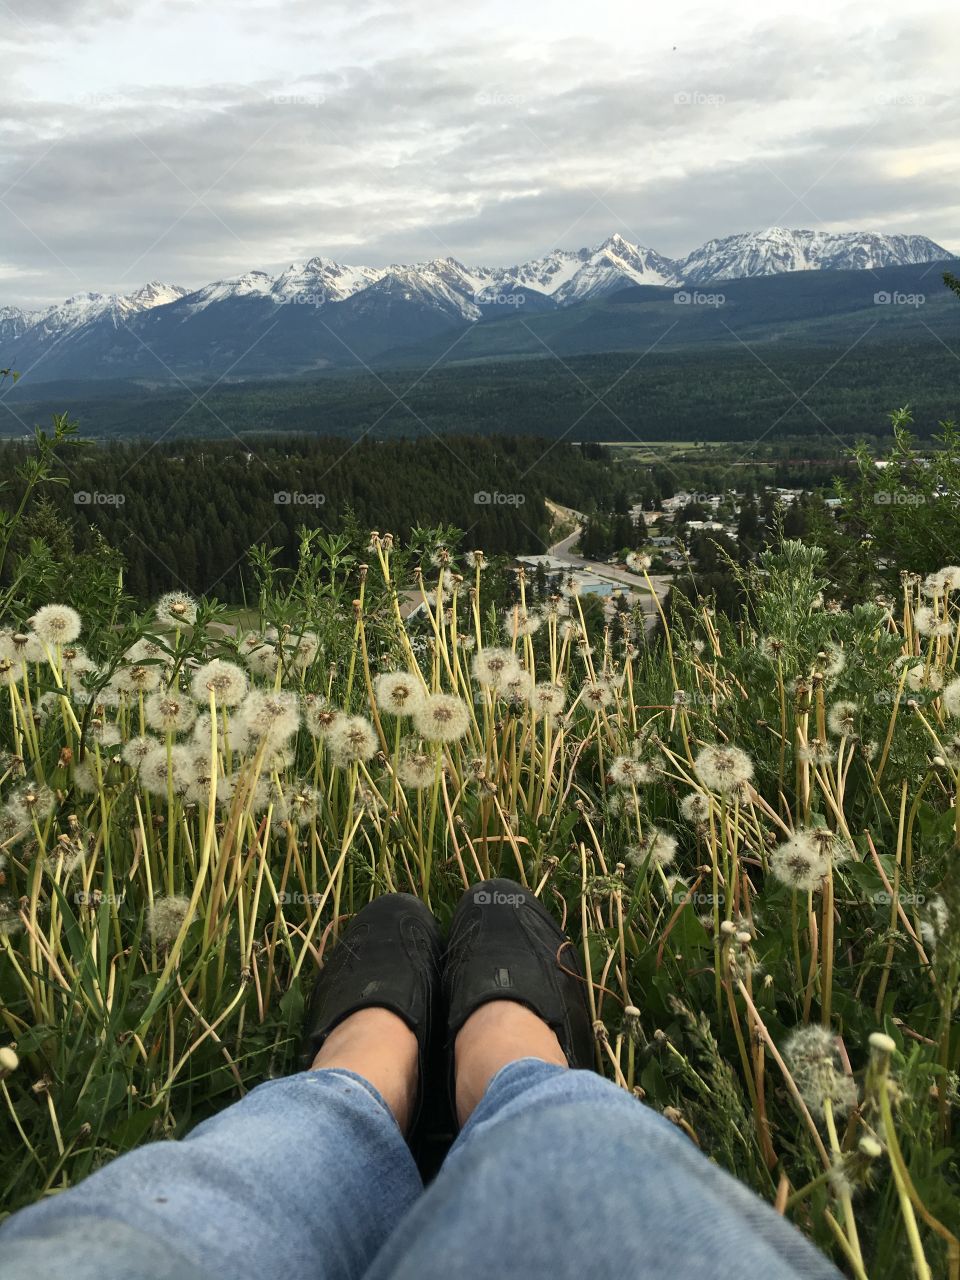 My point of view, from a field of dandelions viewing the Snowcapped Canadian Rockies